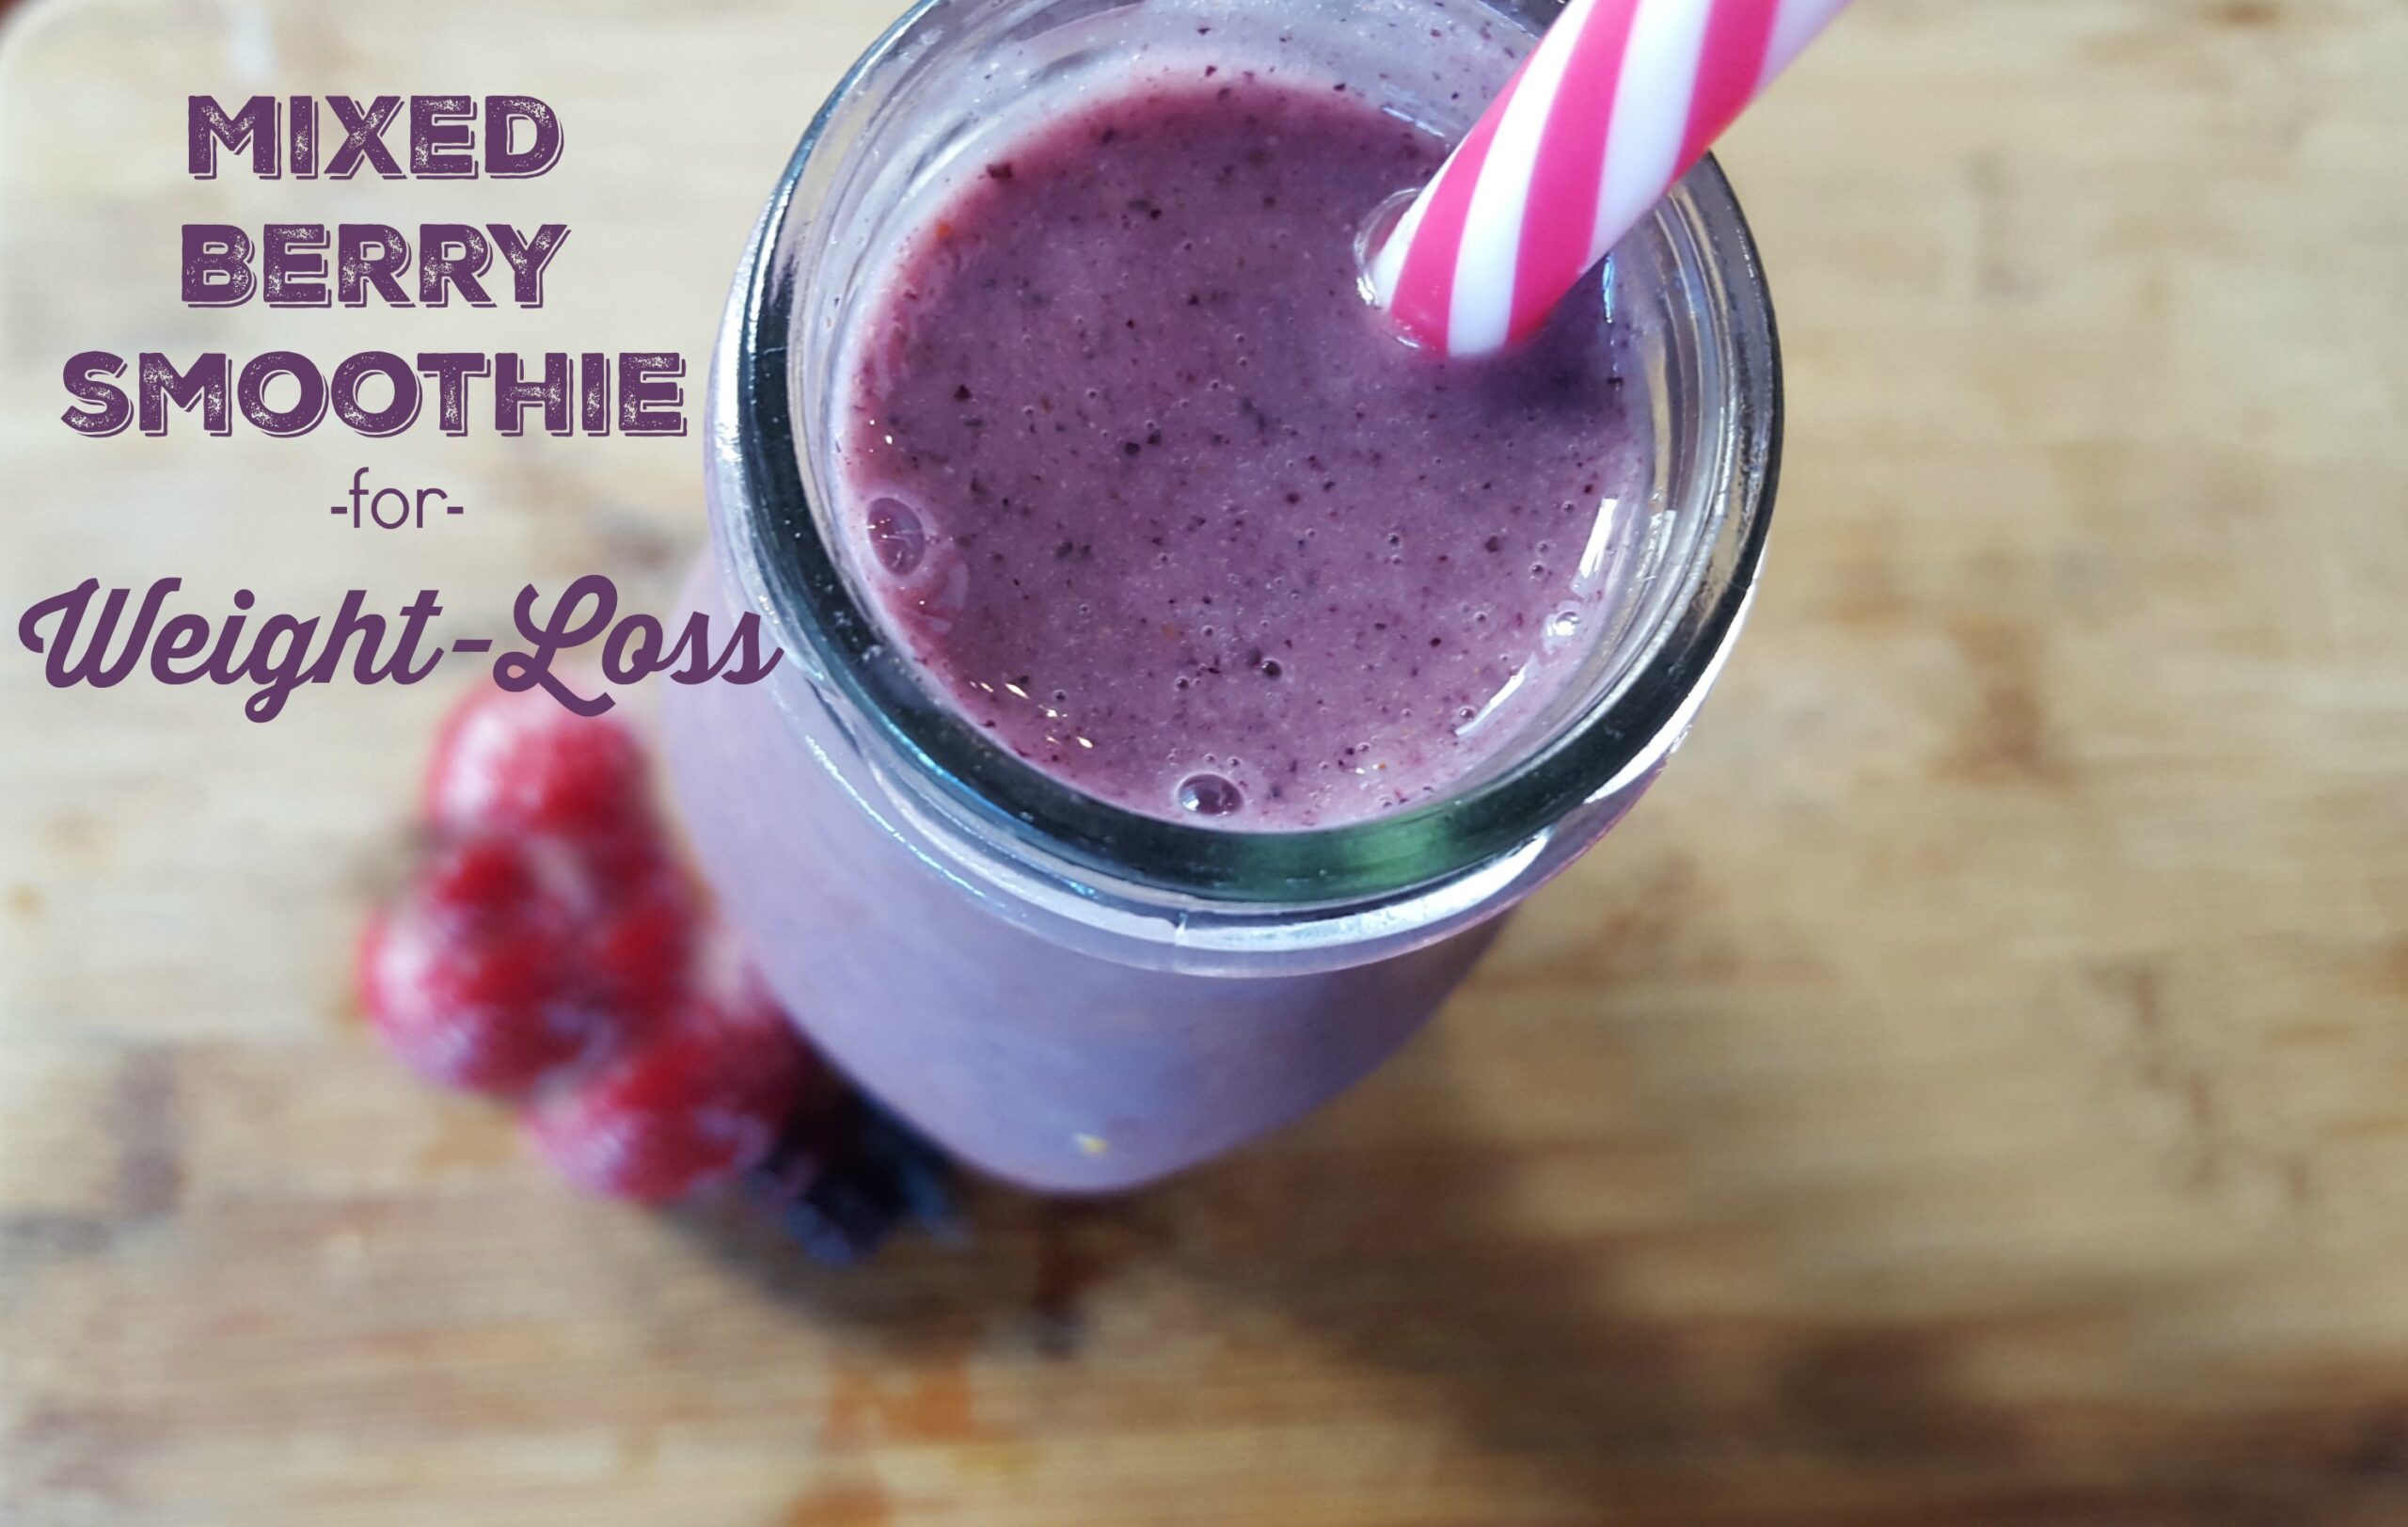 Recipe: Mixed Berry Smoothie with Almond Milk